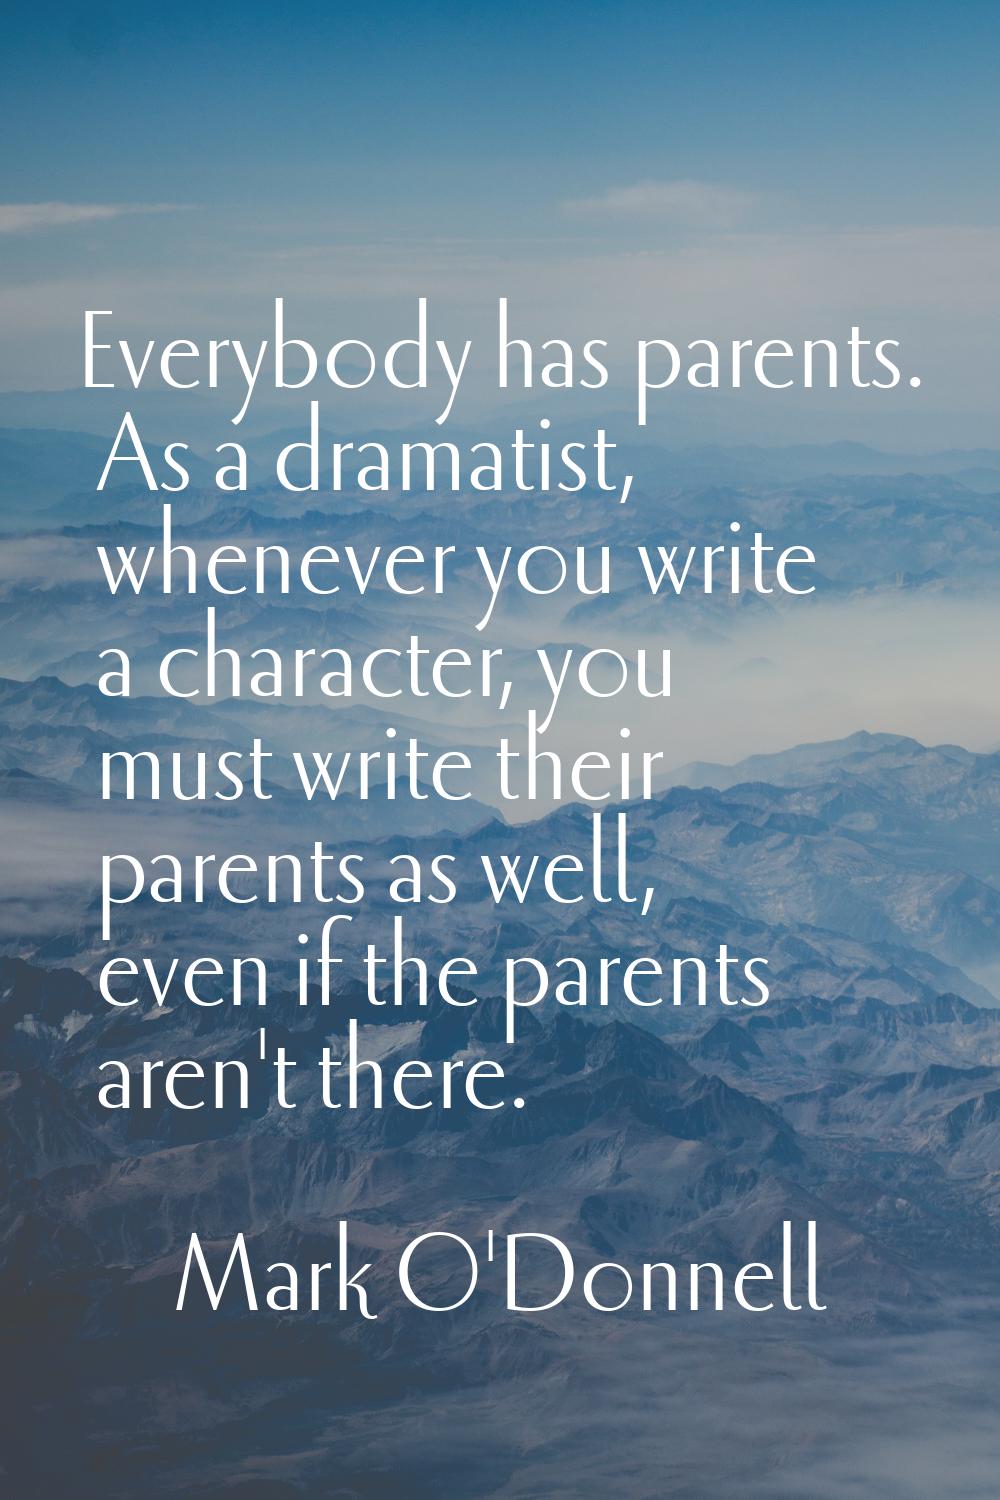 Everybody has parents. As a dramatist, whenever you write a character, you must write their parents